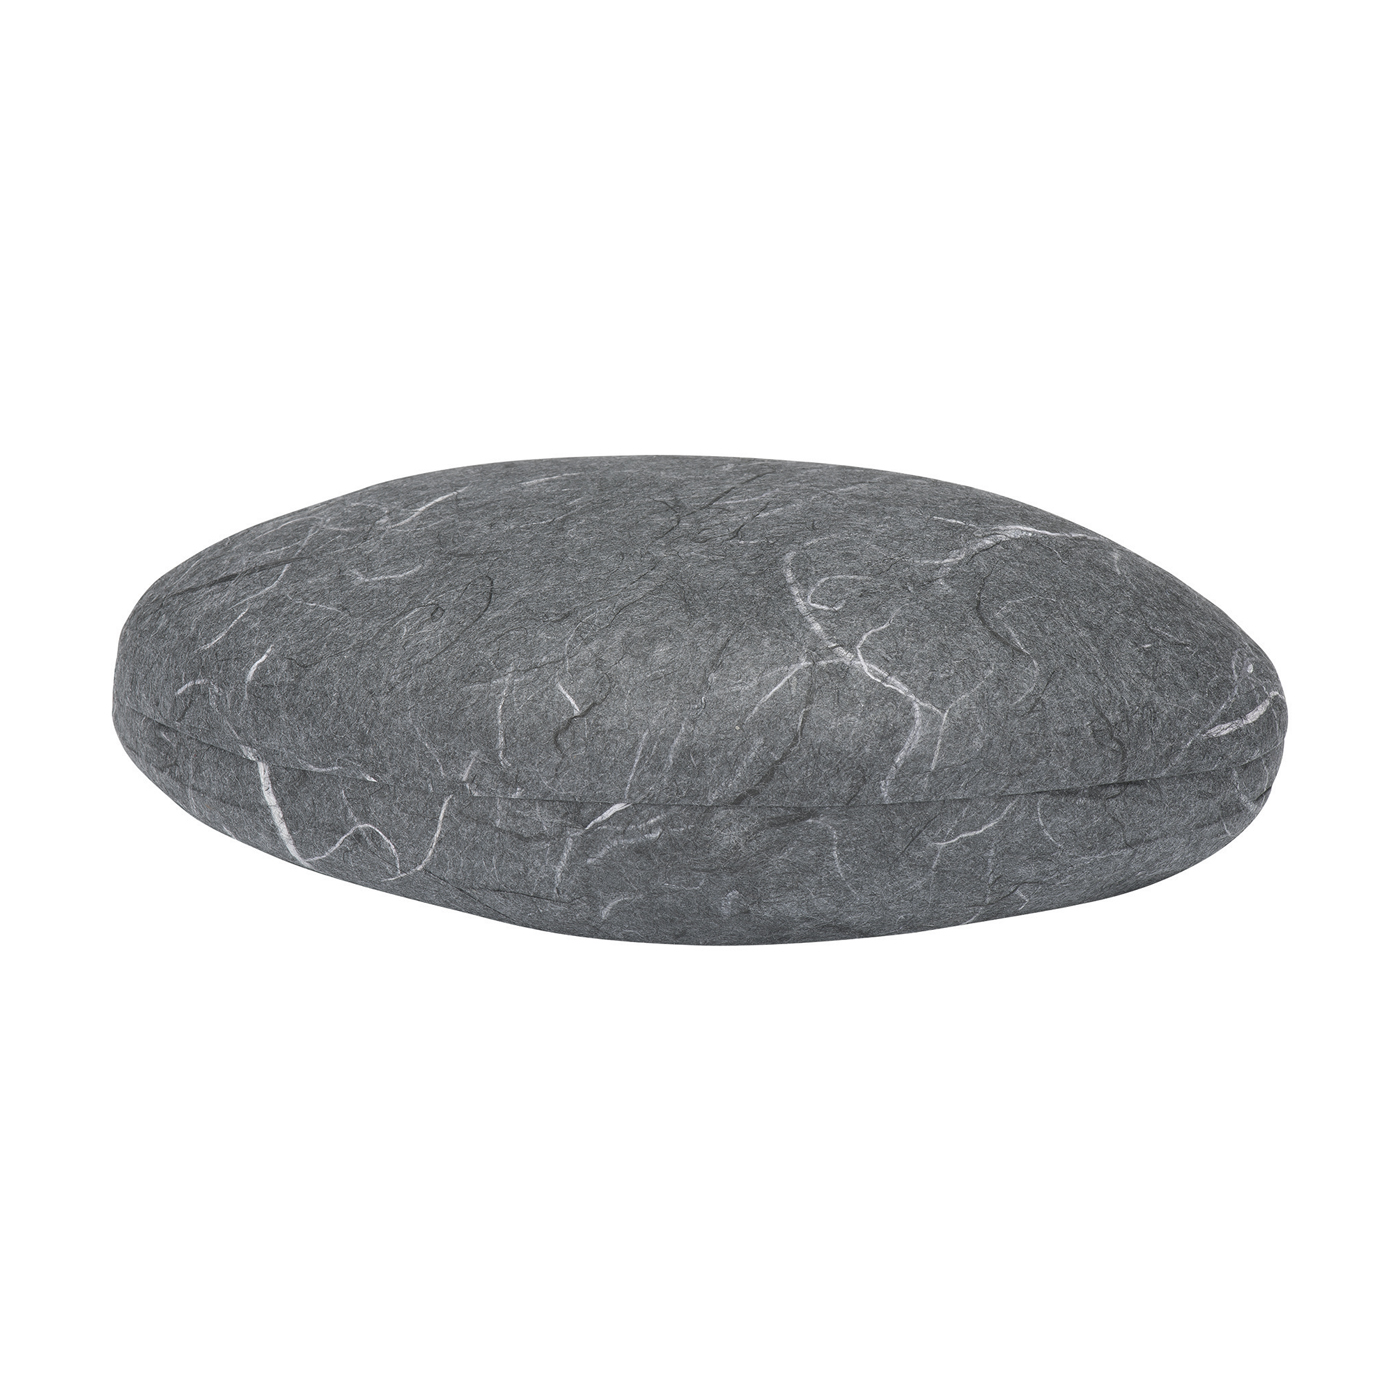 Jewellery Packaging "Stone", Anthracite Mottled,150x100x45mm - 1 piece